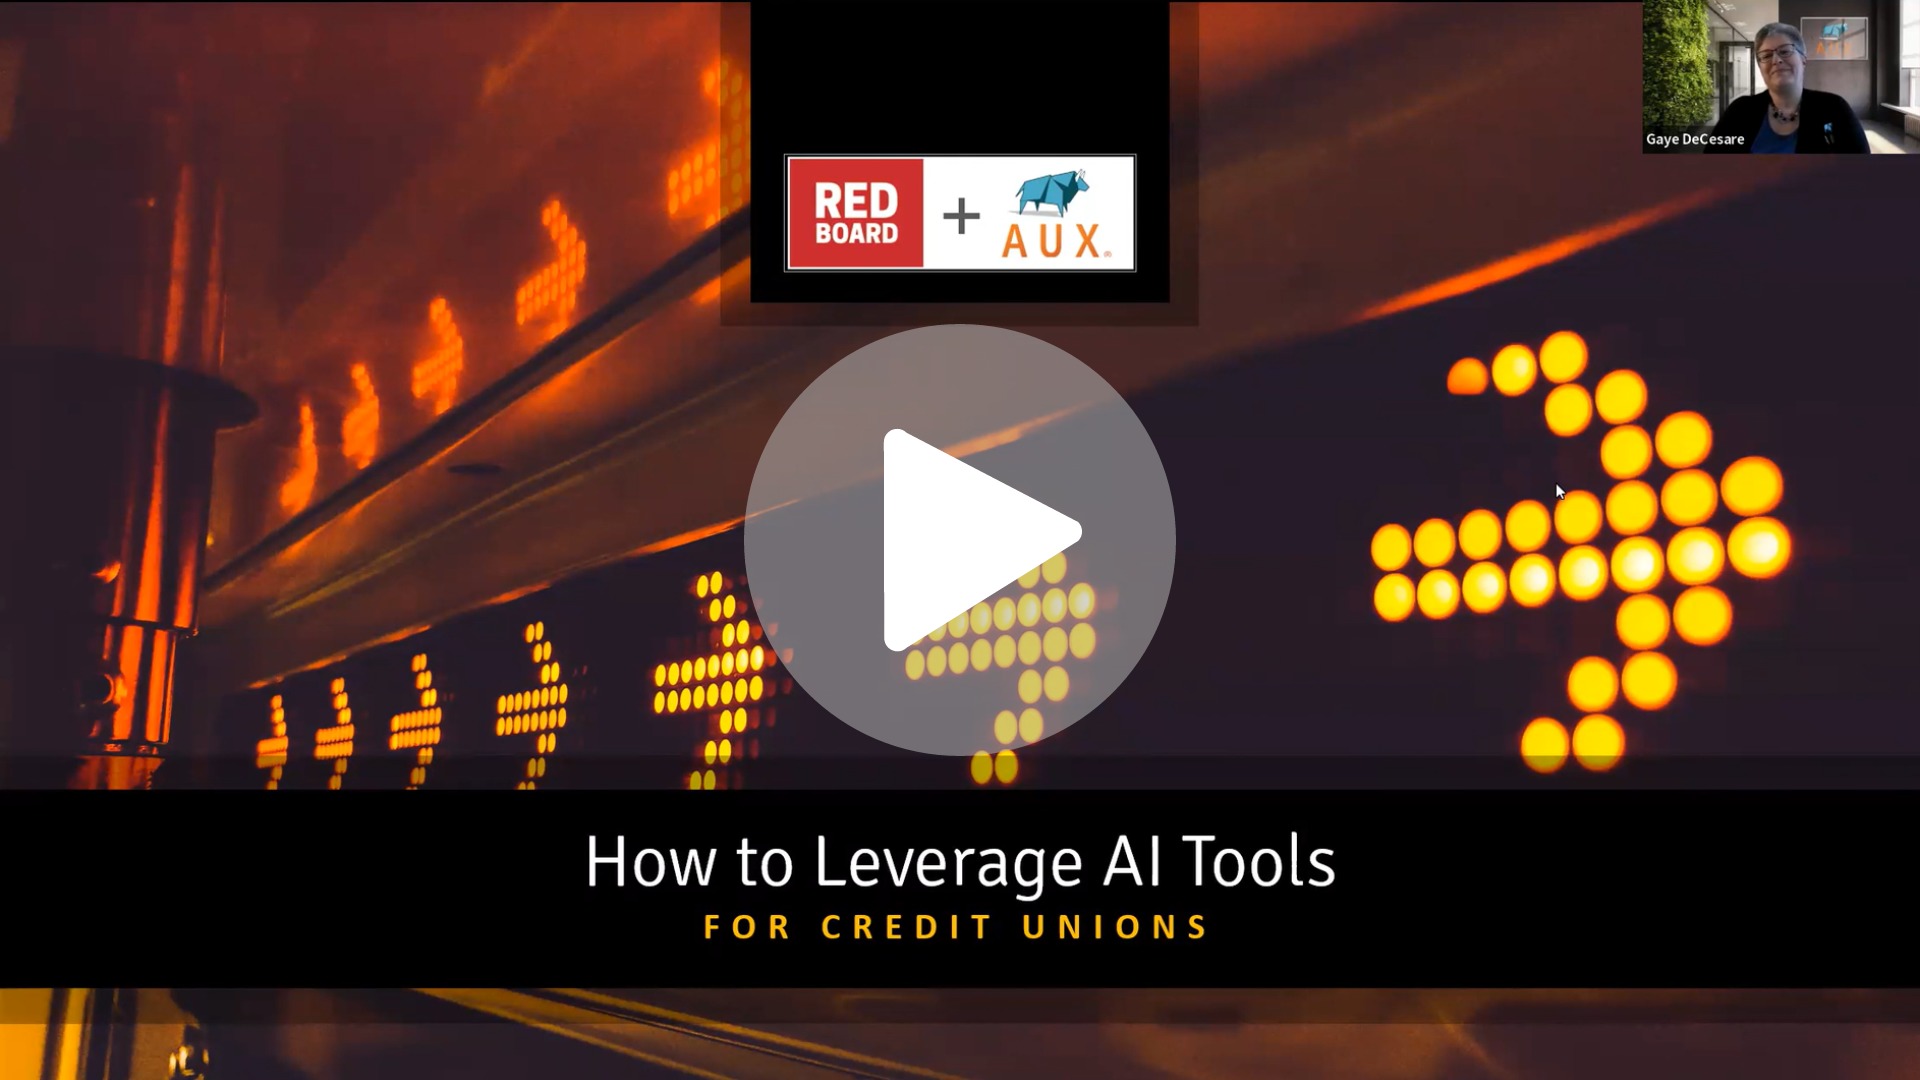 PLAY BUTTON: The image displays a presentation slide with a dark background. At the top, there is a logo combination for "RED BOARD + AUX." In the middle, an arrow is creatively illustrated with bright orange dots against the dark backdrop, symbolizing progress or direction. Below this, a title in a prominent black bar reads "How to Leverage AI Tools" in white text, with a subtitle "FOR CREDIT UNIONS" indicating the focus of the presentation. The design conveys a sense of innovation and forward-thinking, particularly in the context of financial services and technology.